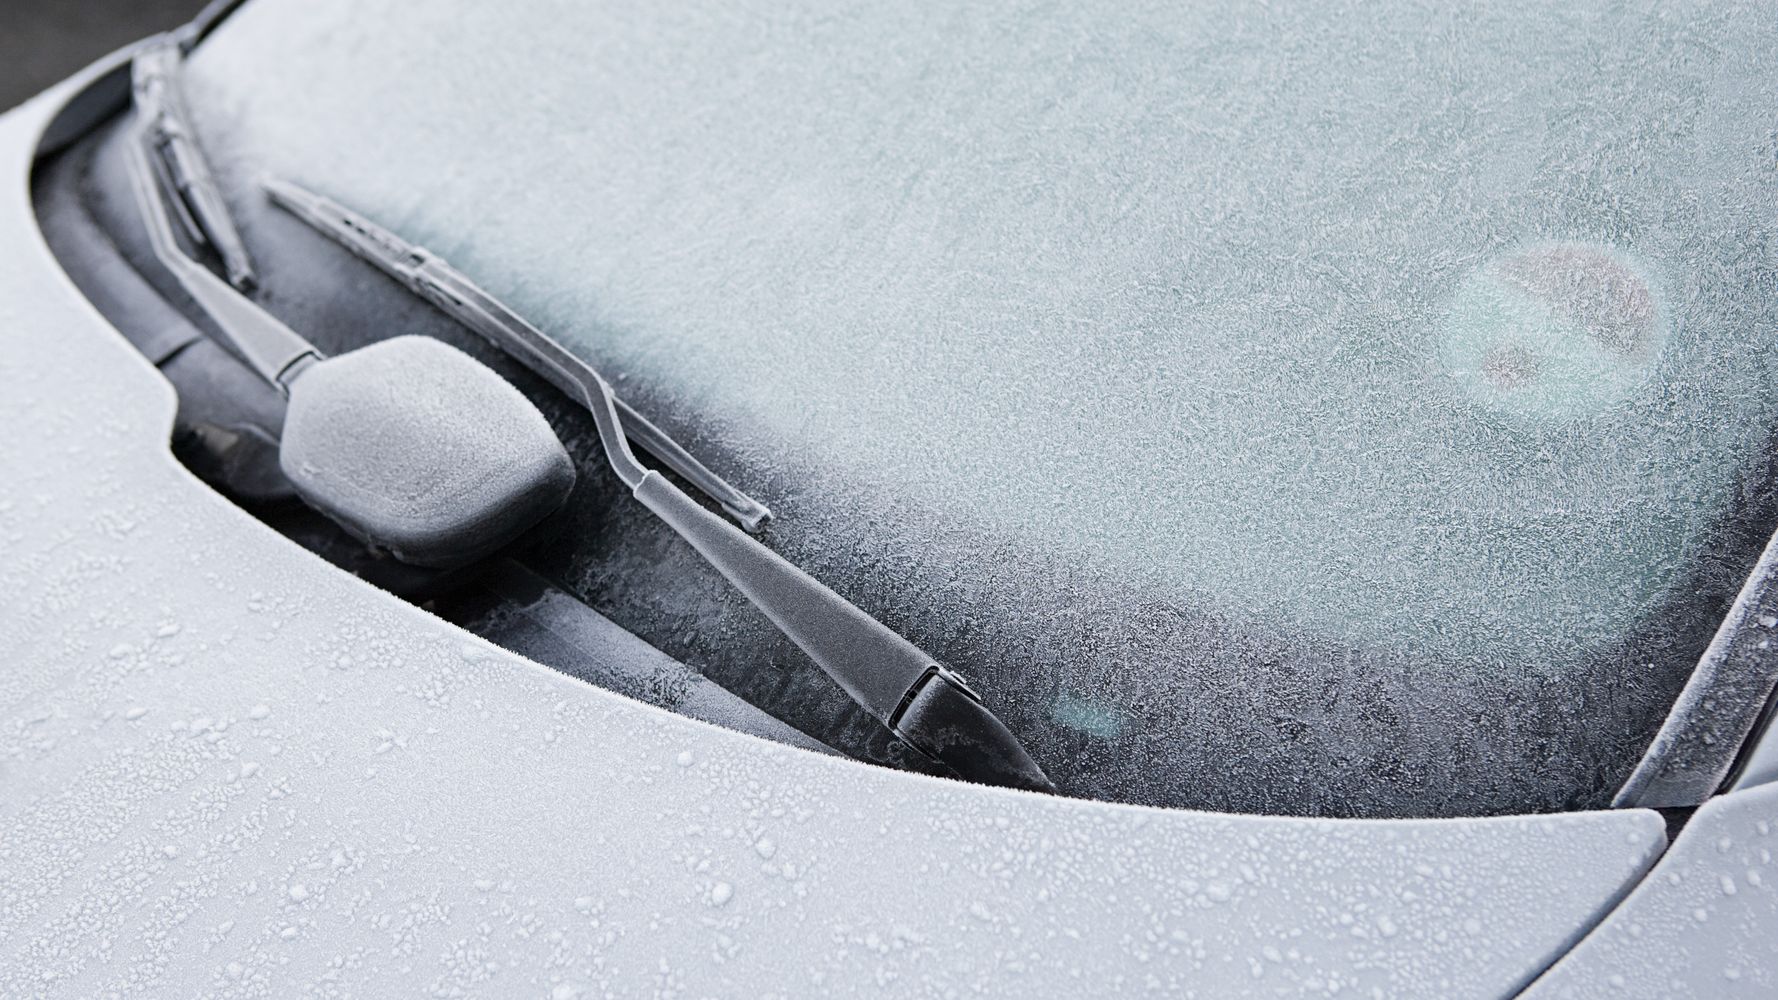 Life Hacks: Using Alcohol & Water Solution to Defrost Your Windshield 